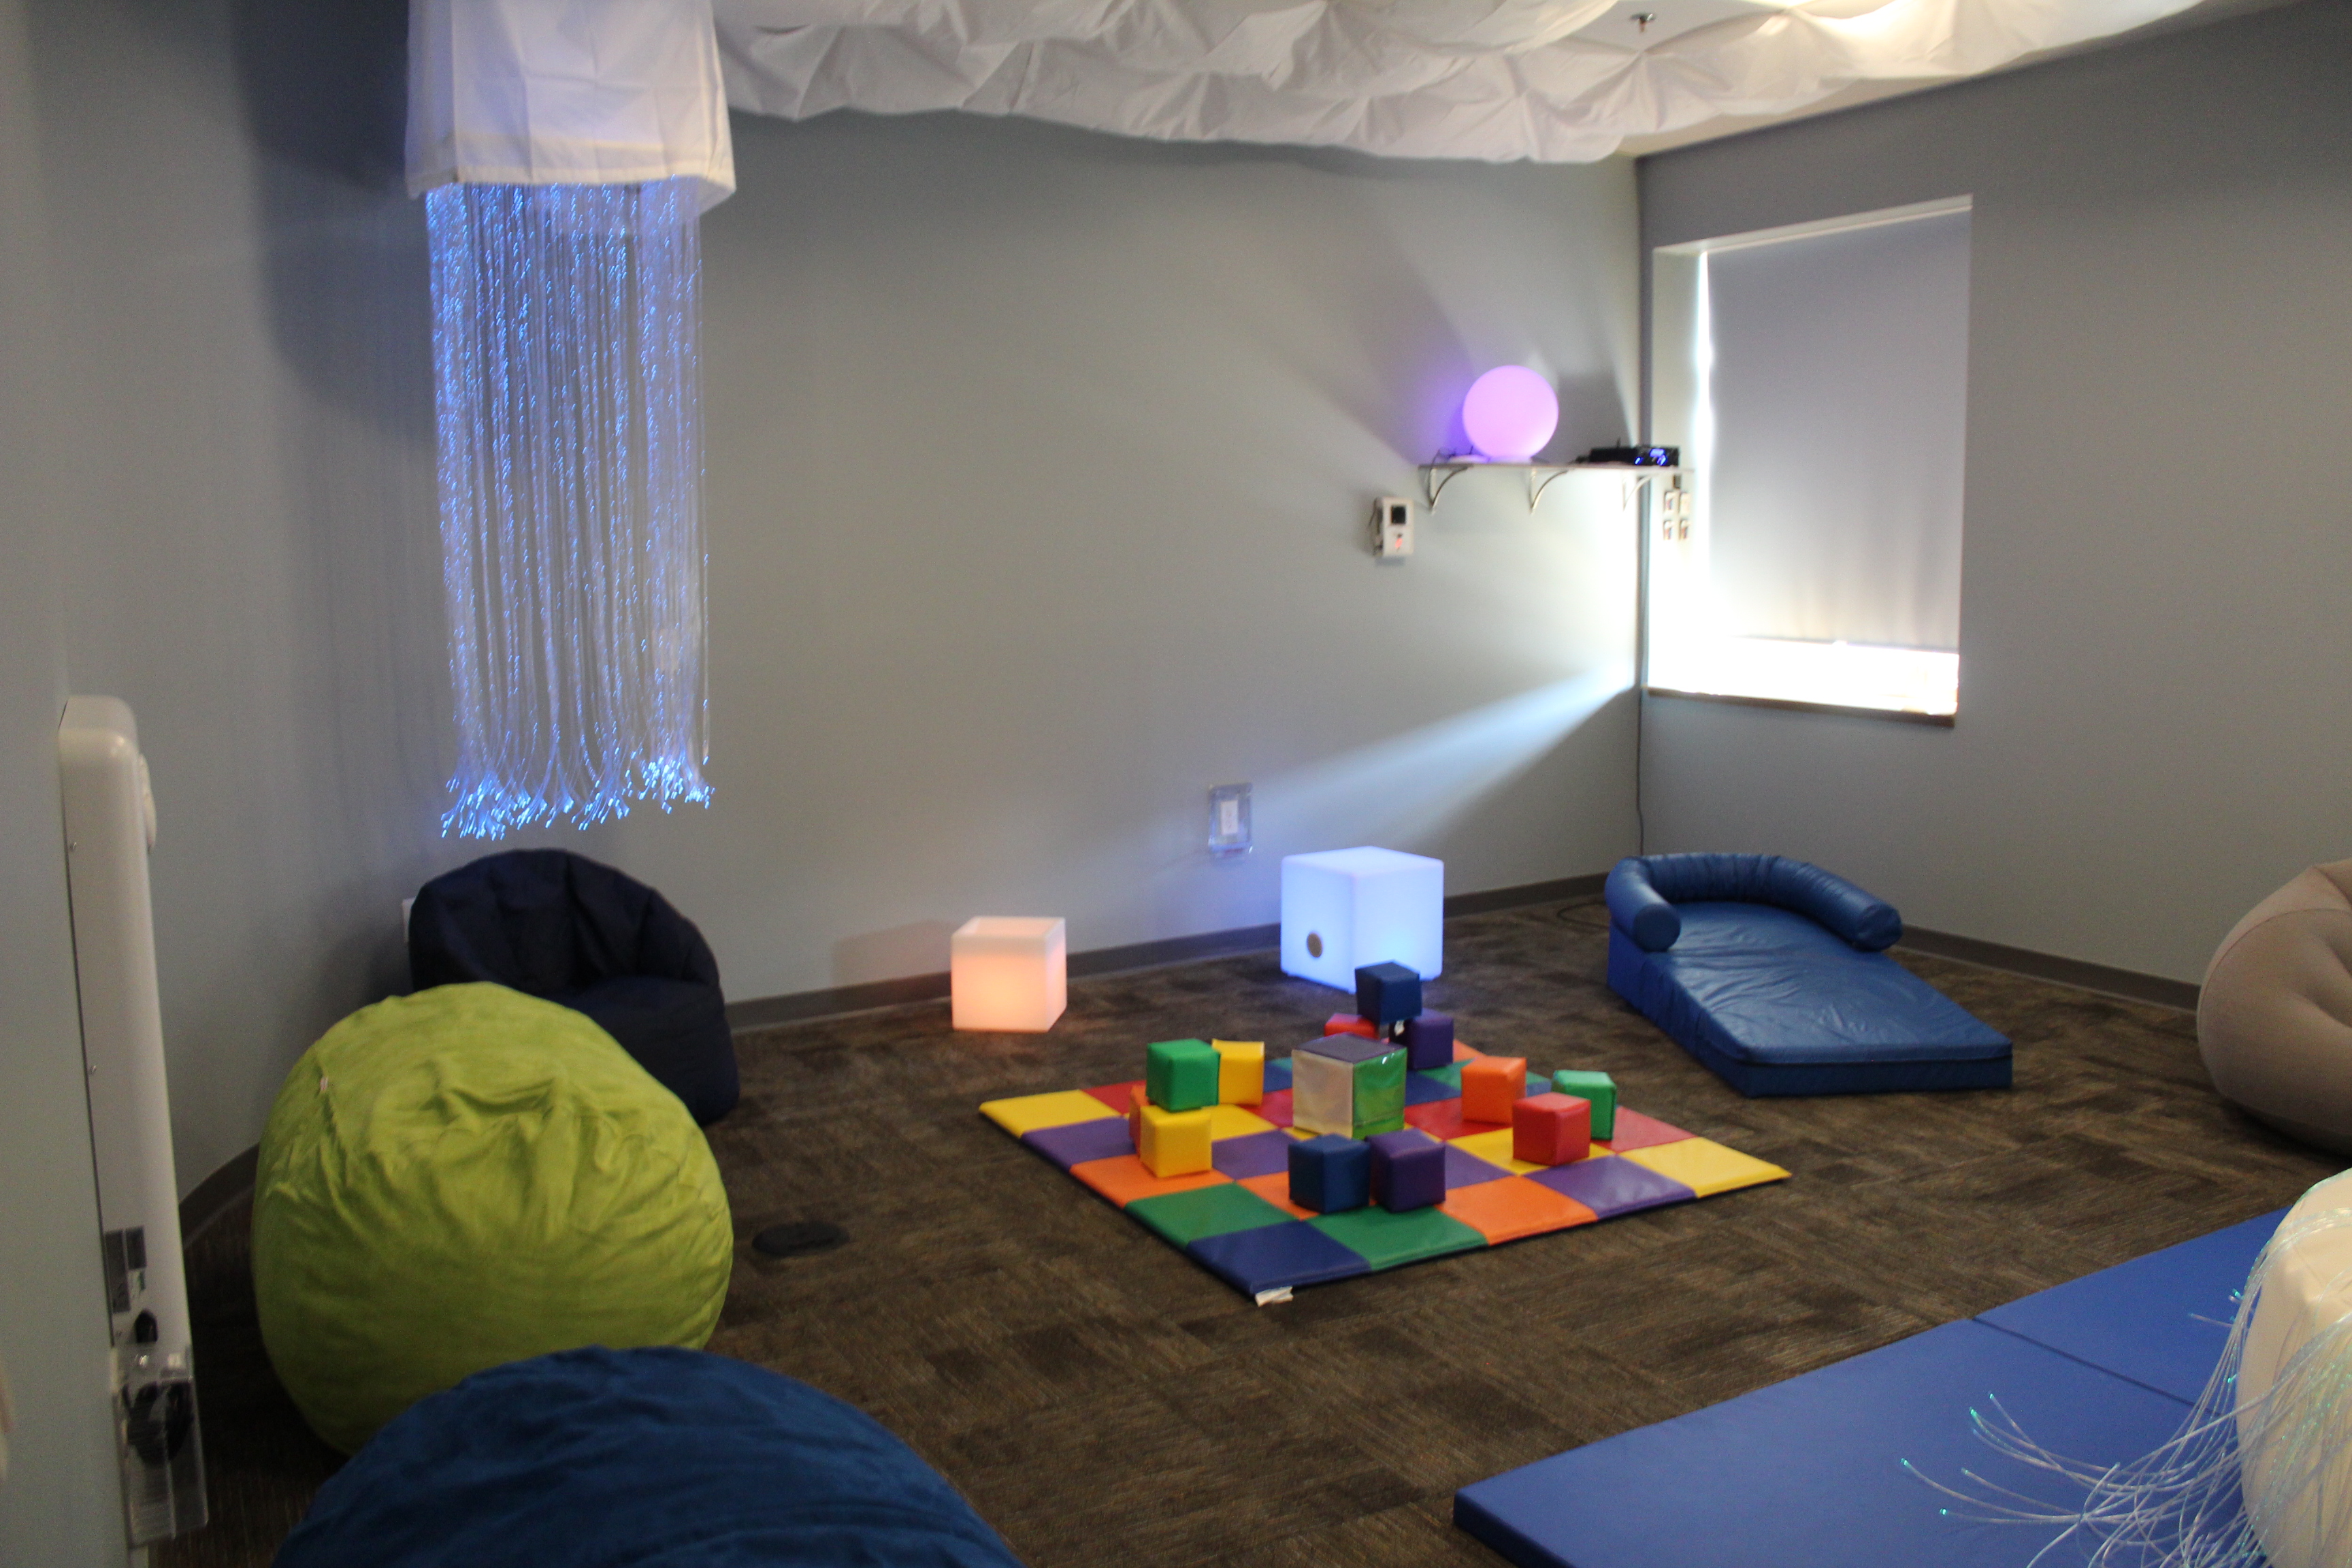 Photograph of Ocean County Library's Sensory Space. The photograph shows the room with a the hanging LED lights, bean bags, tactile tiles, LED boxes and plush floor.